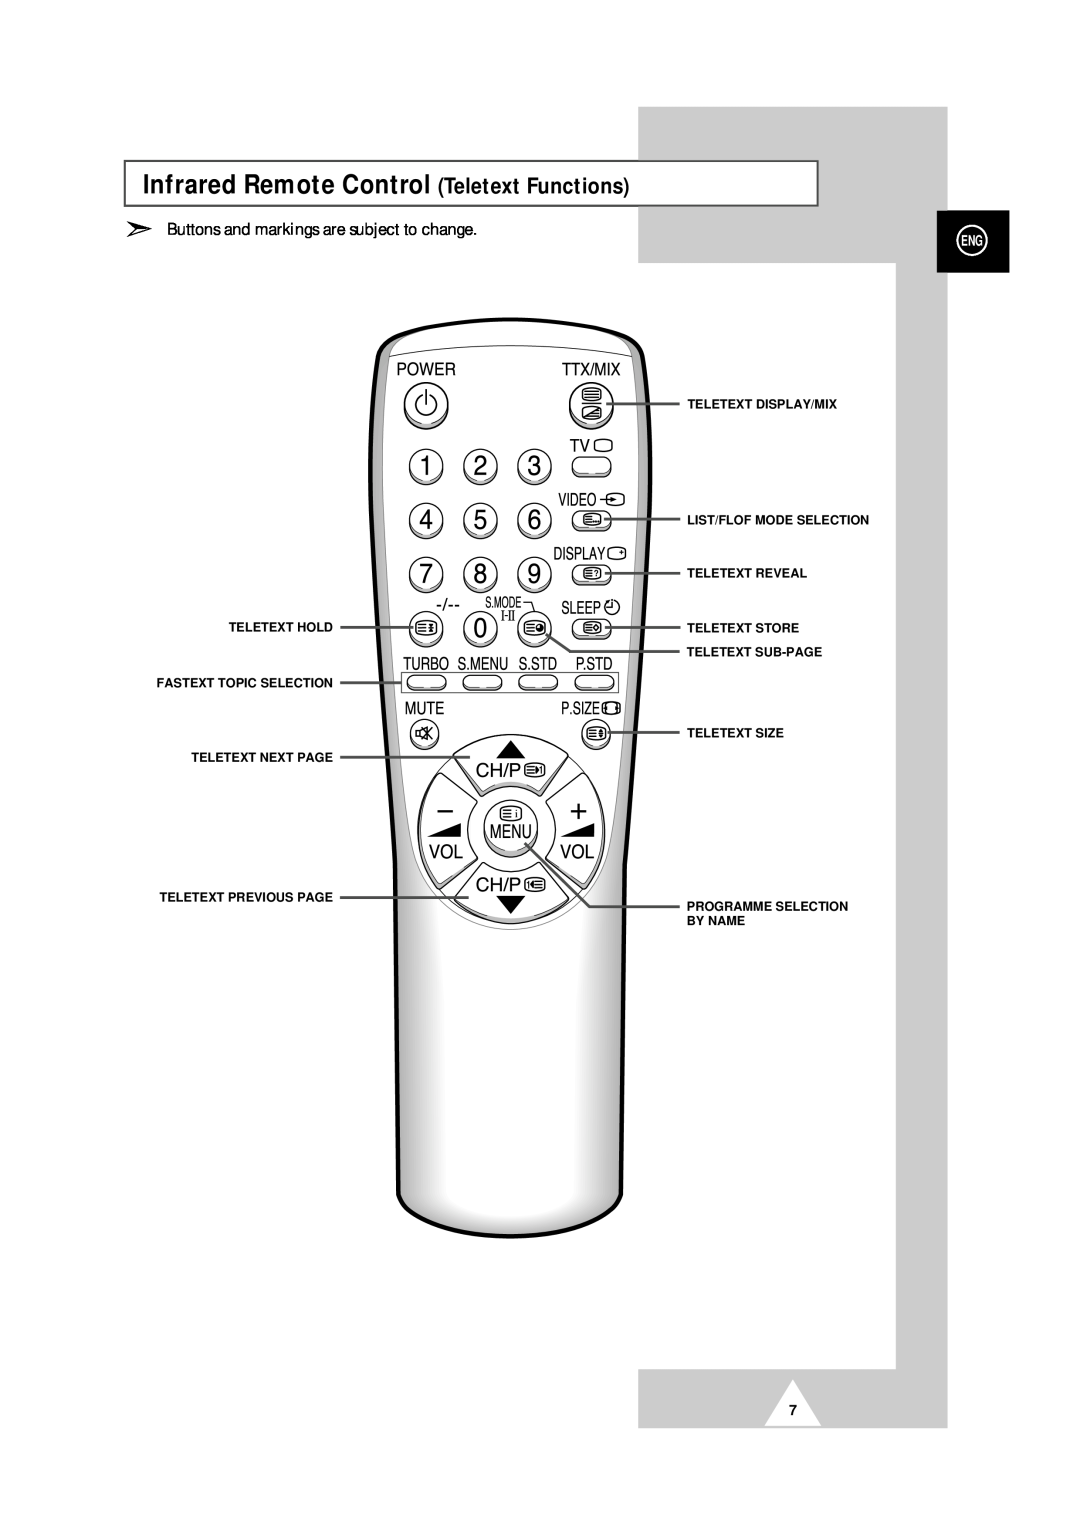 Samsung 25A6, 29A5, 29A6, 29A7, 29K3, 29K5, 29M6, 29U2, 34A7 manual Infrared Remote Control Teletext Functions 